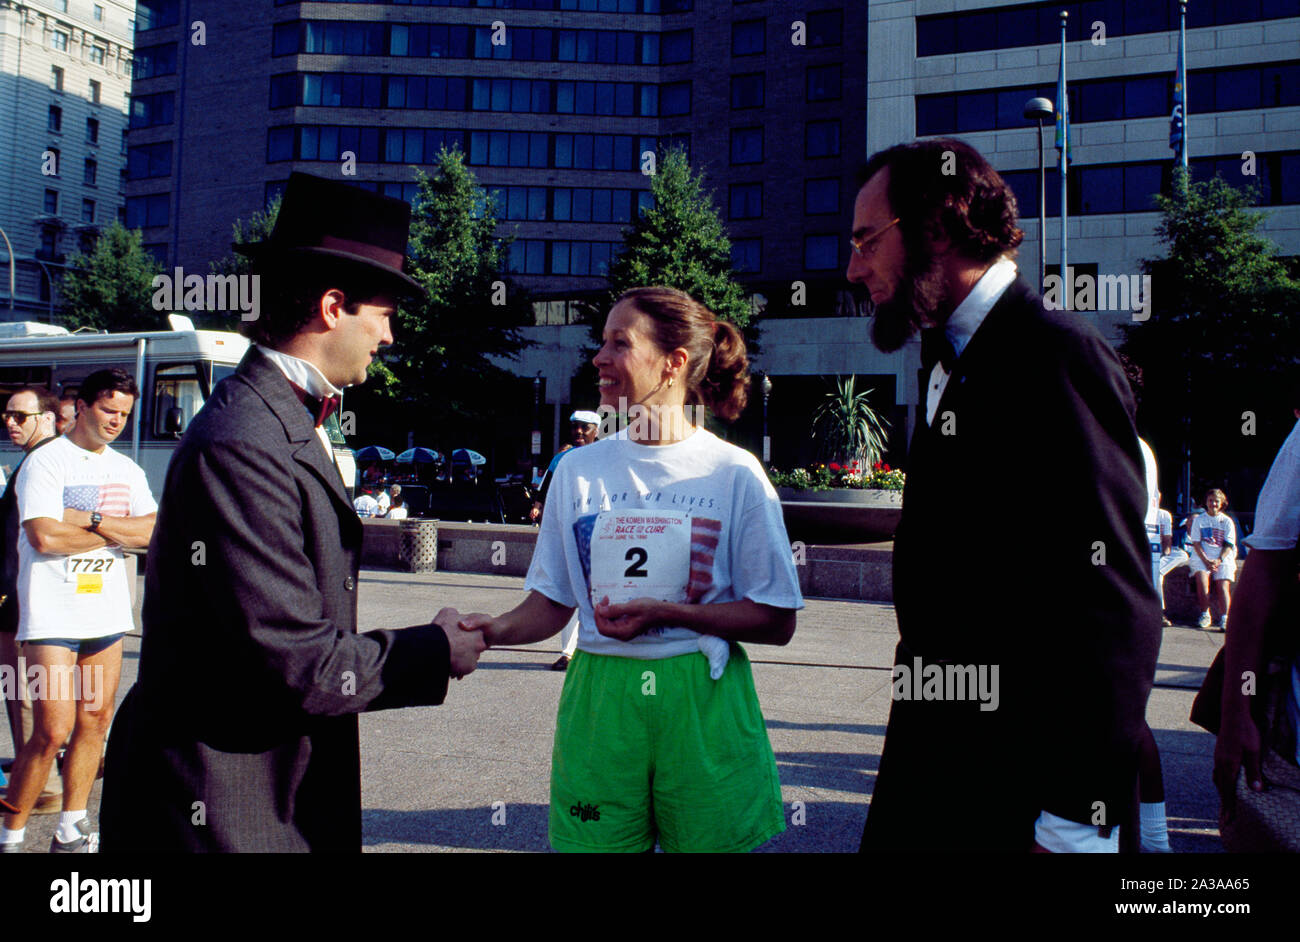 Second Lady Marilyn Quayle and a historic interpreter at a Race for the (Cancer) Cure run in 1990, Washington, D.C Stock Photo